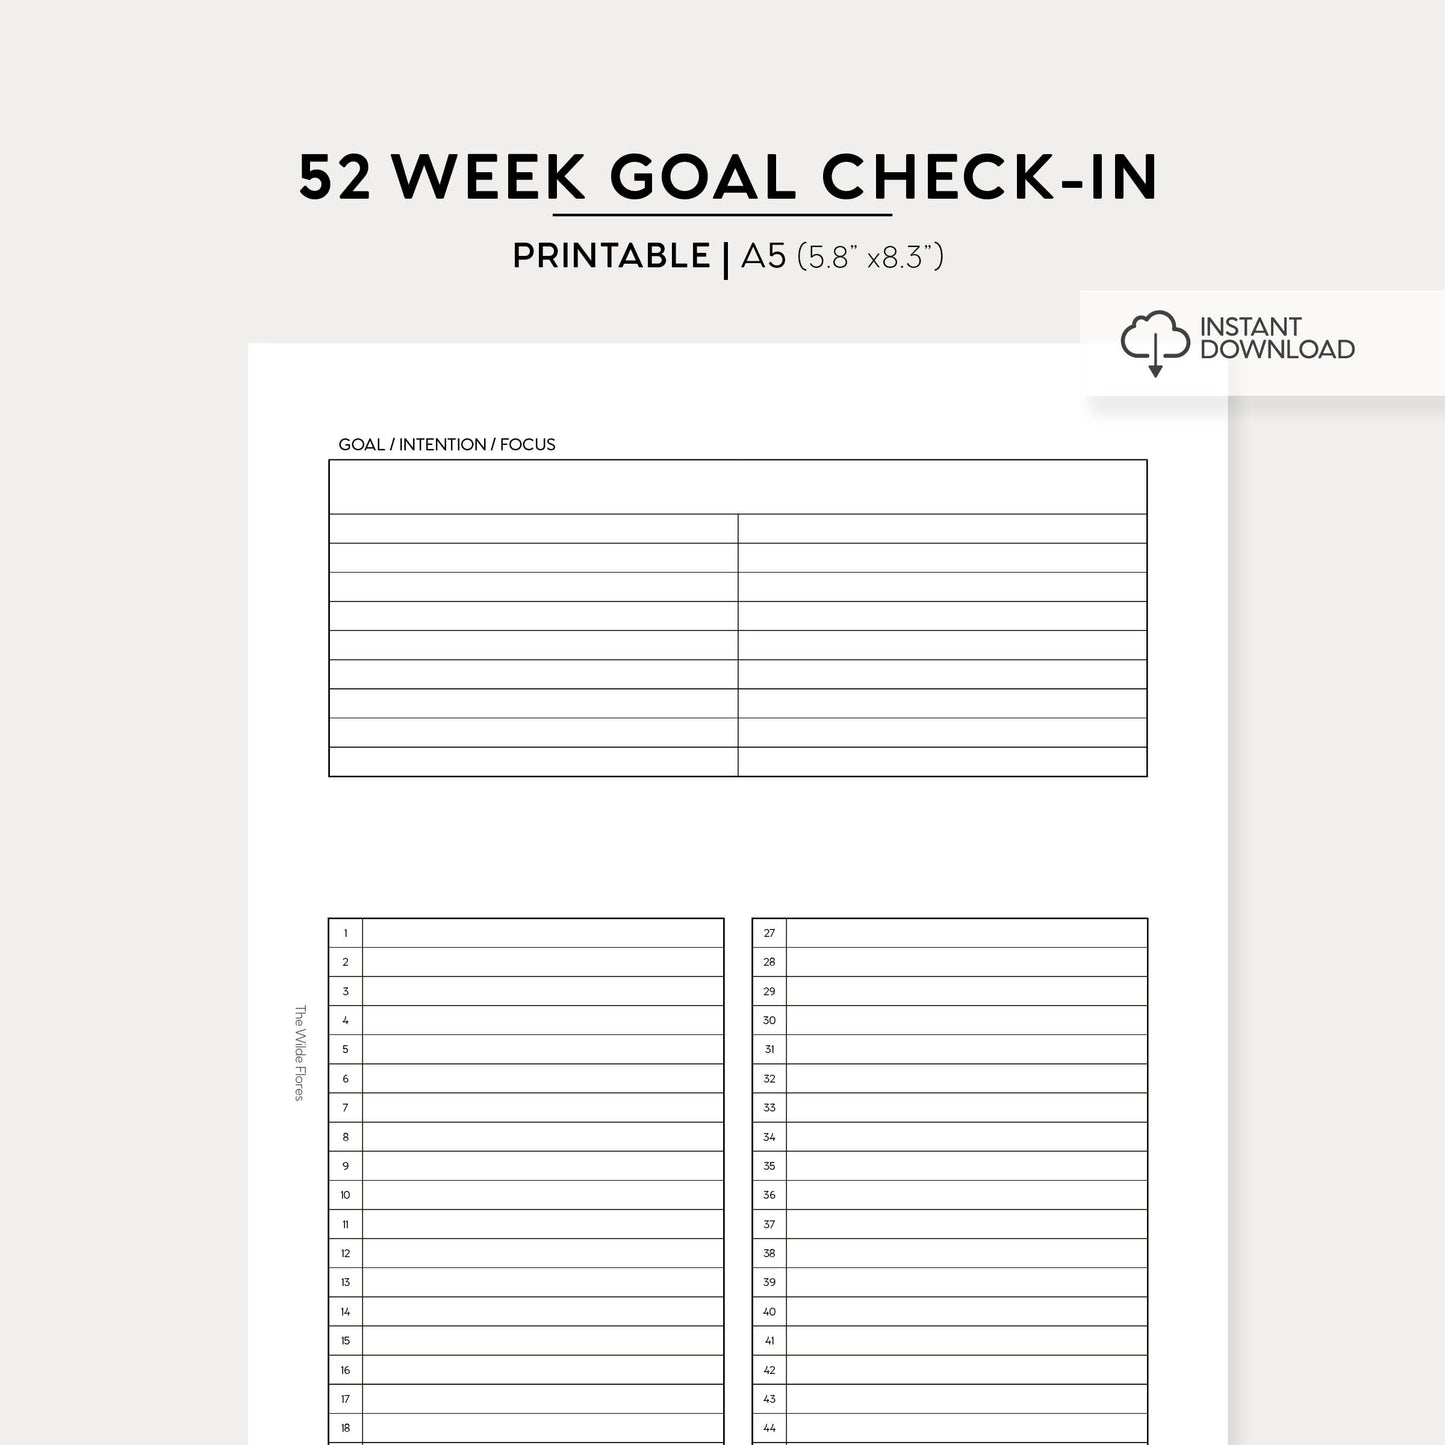 52 Week Goal Check In: A5 Size Printable